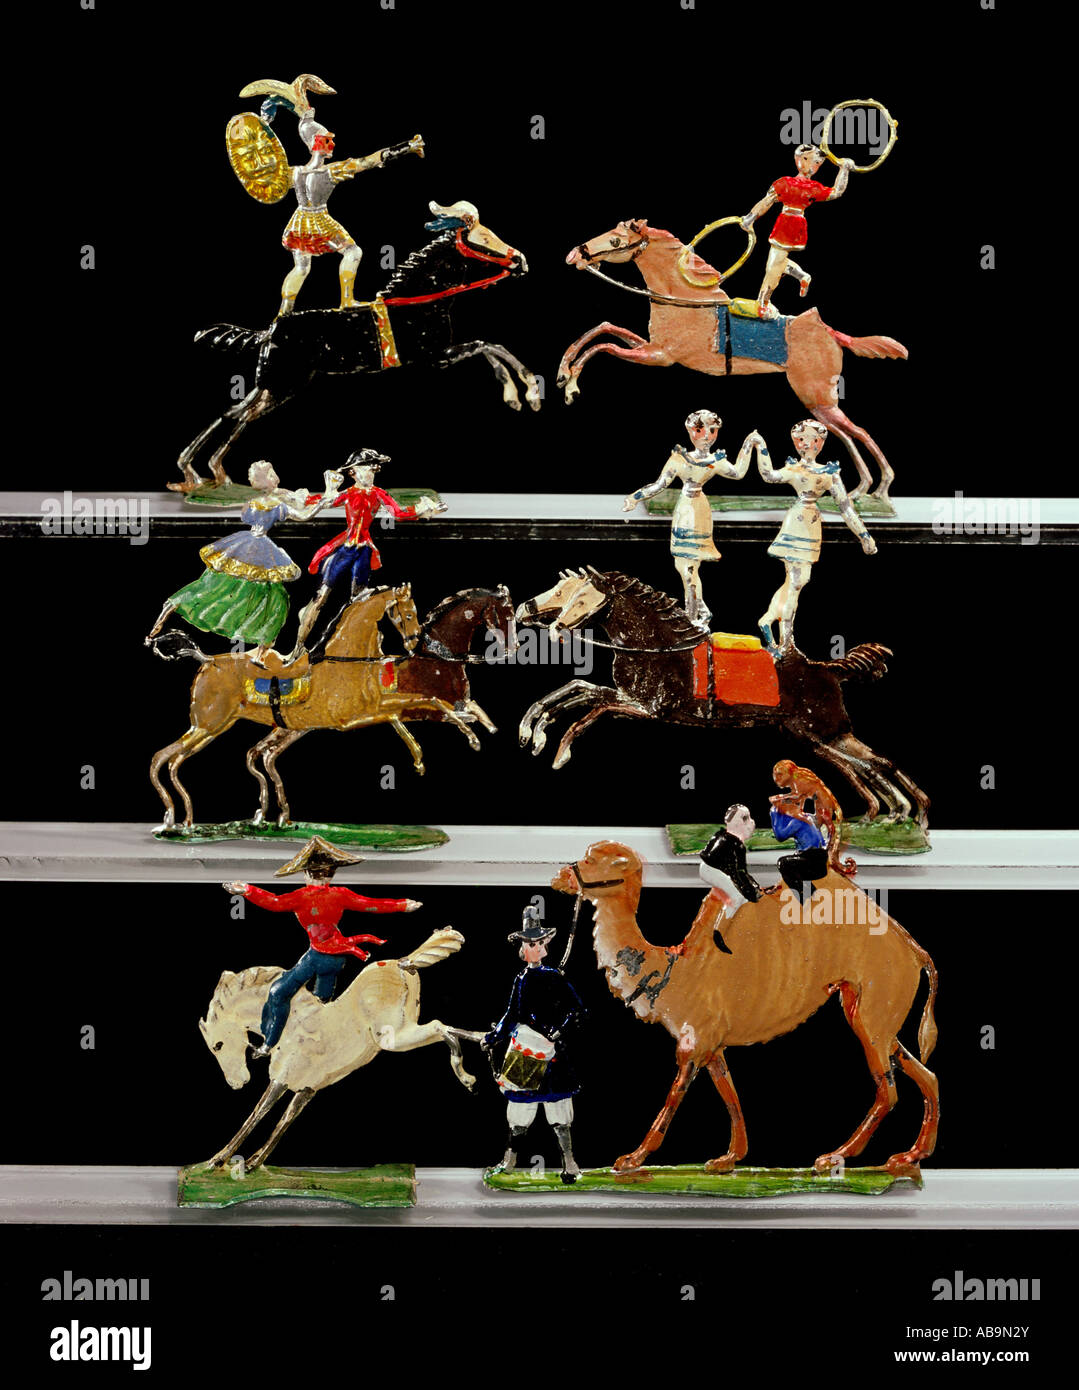 Camel images hi-res master stock and Alamy photography -